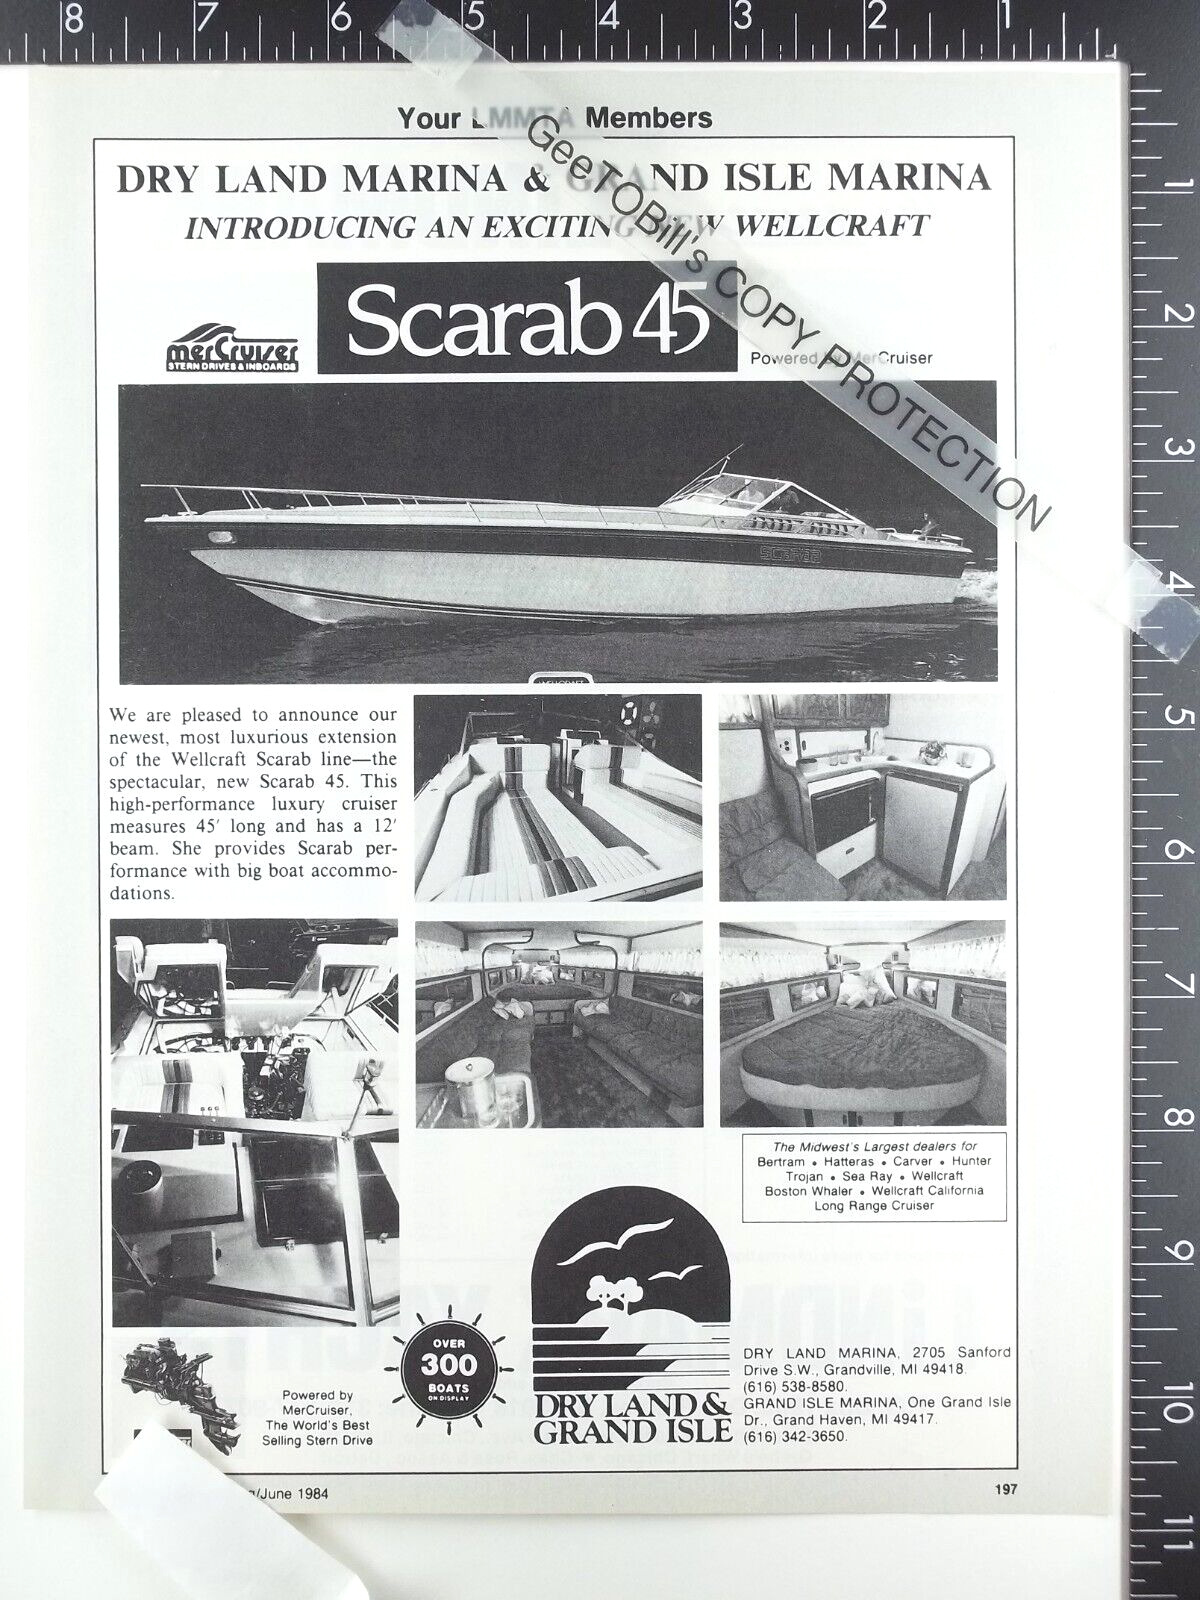 1984 ADVERTISING for Dry Land Grand Isle Marina, Wellcraft Scarab 45 power boat